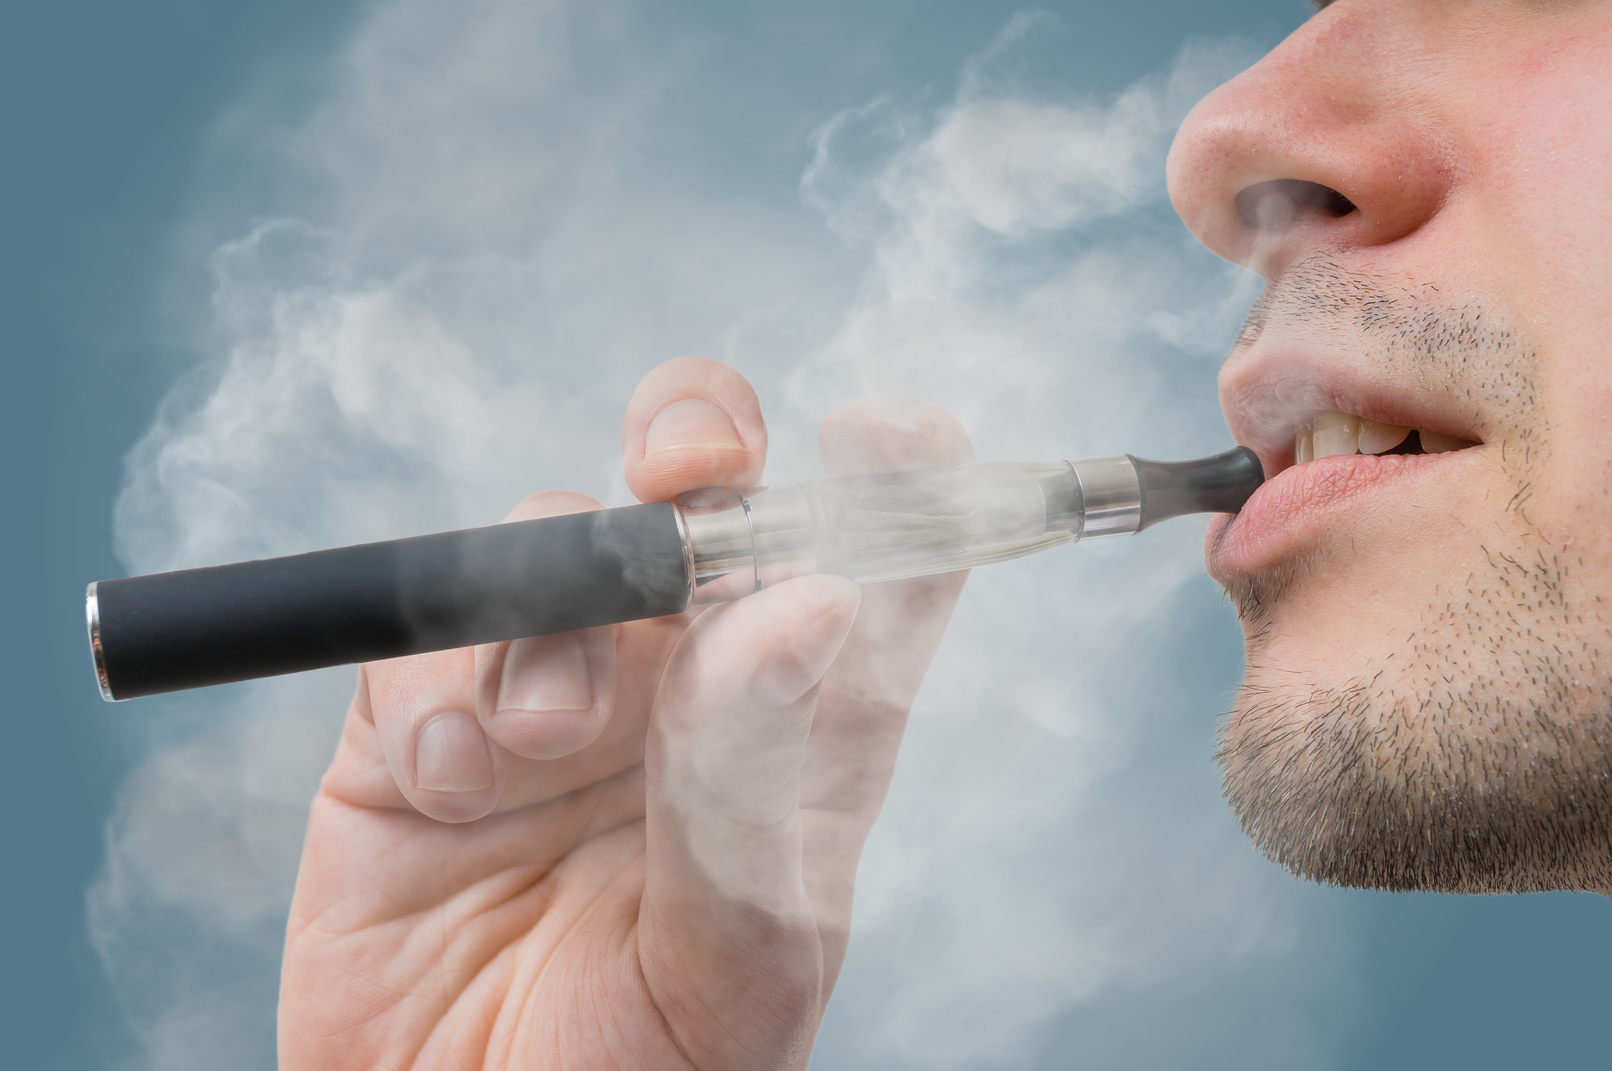 New York Governor Takes Emergency Action to Ban Flavored E-Cigarettes